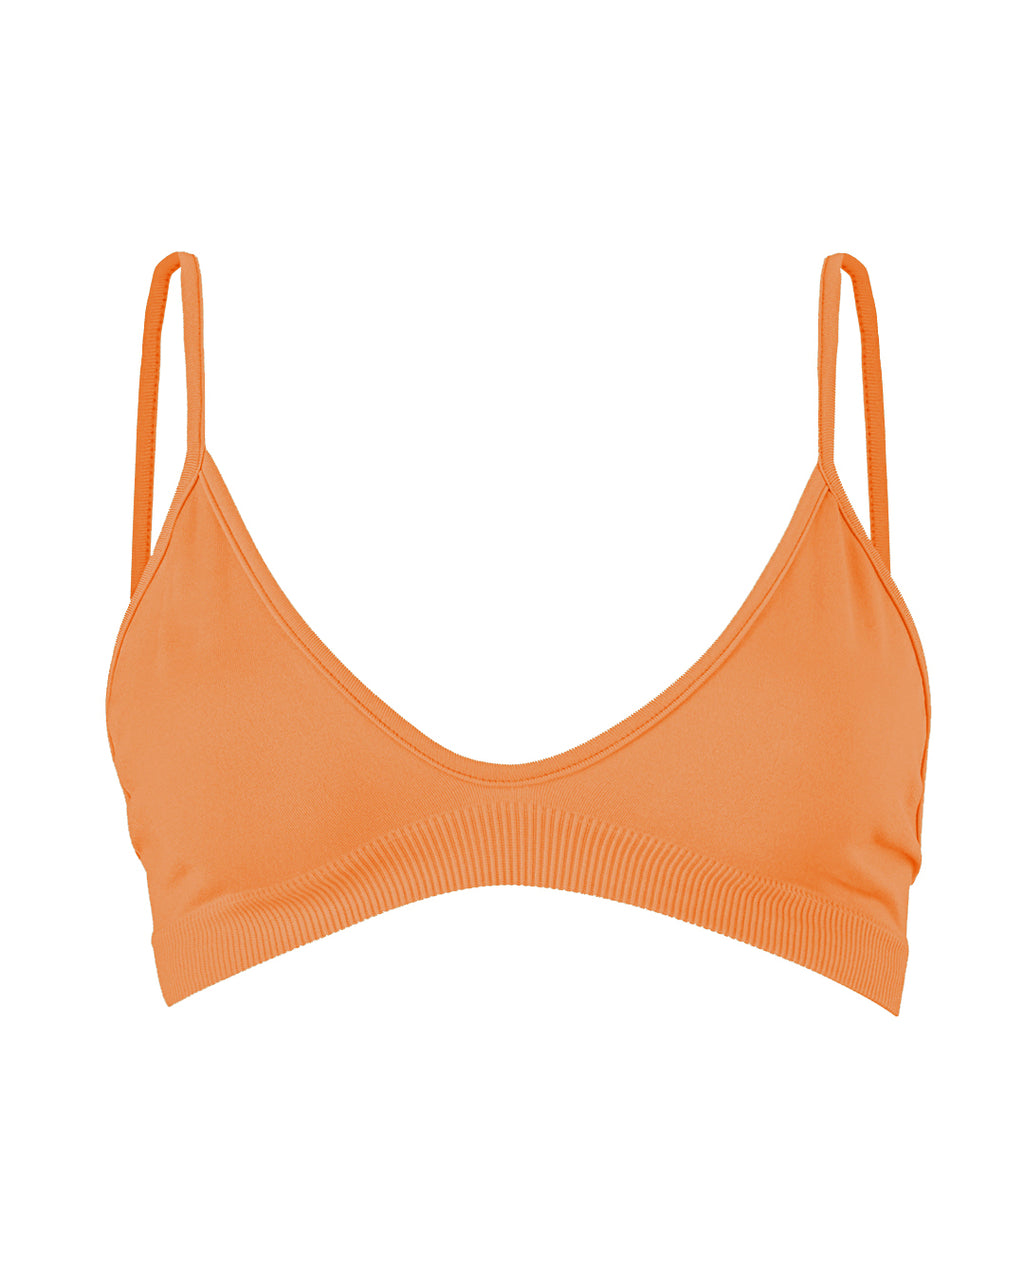 BLISSFUL Apricot Top, Curved Low Cut with Spaghetti Straps, Ribbed Band  Support, Versatile as Bra/Bikini/Sports Top